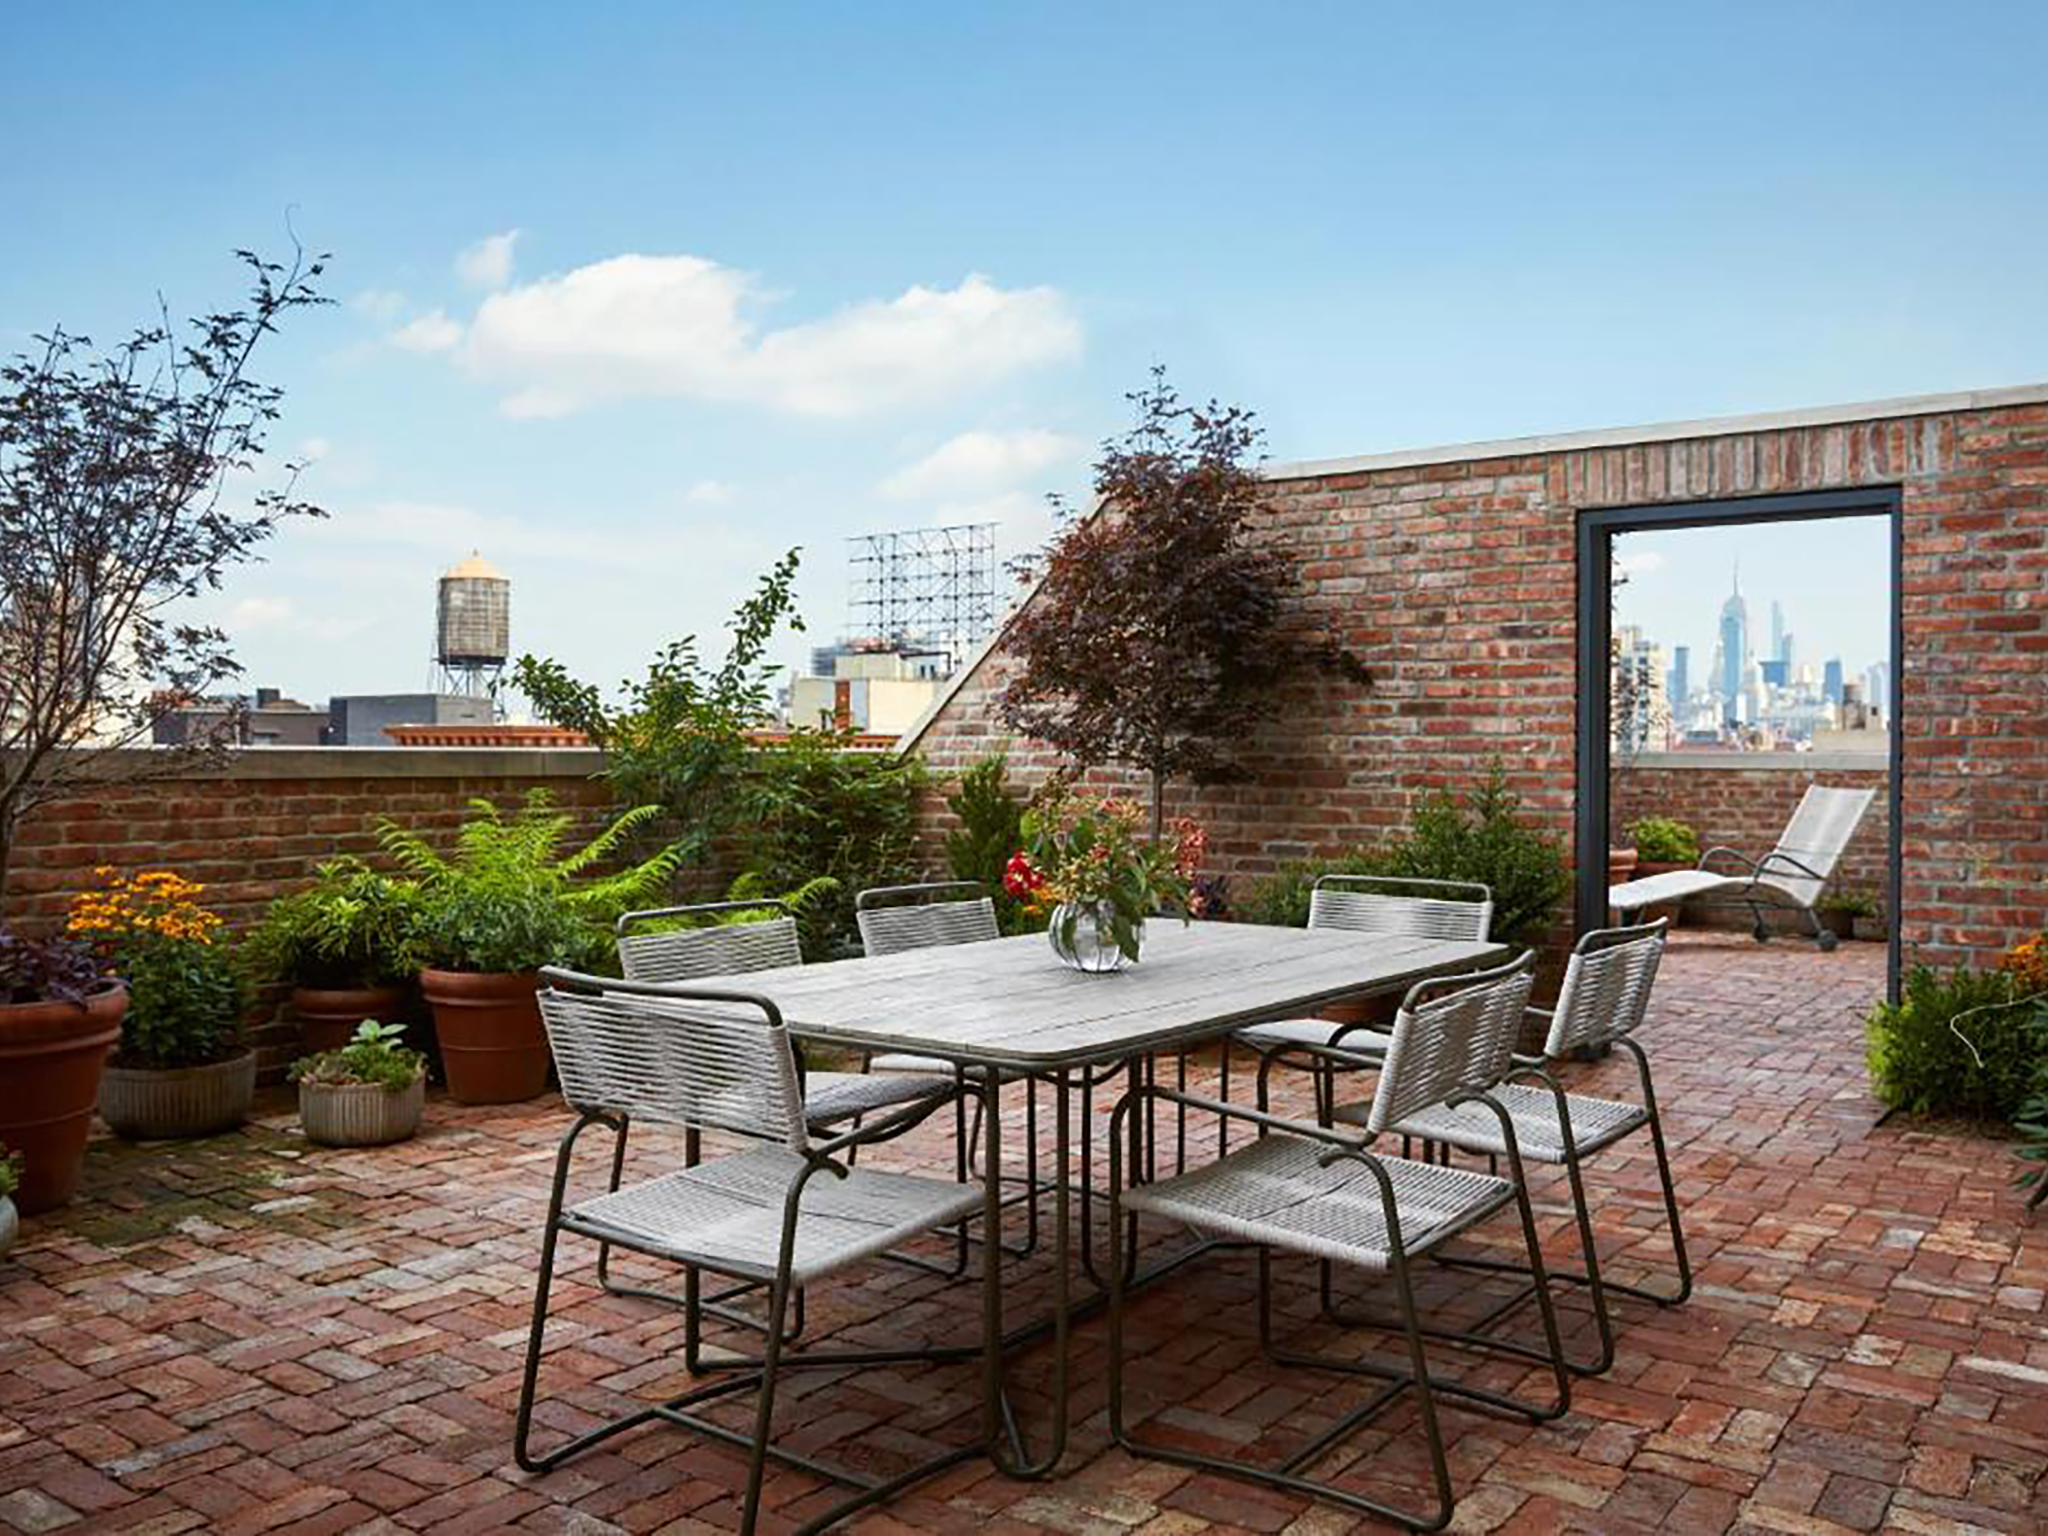 The Nine Orchard’s terrace has a spectacular view of the NYC skyline